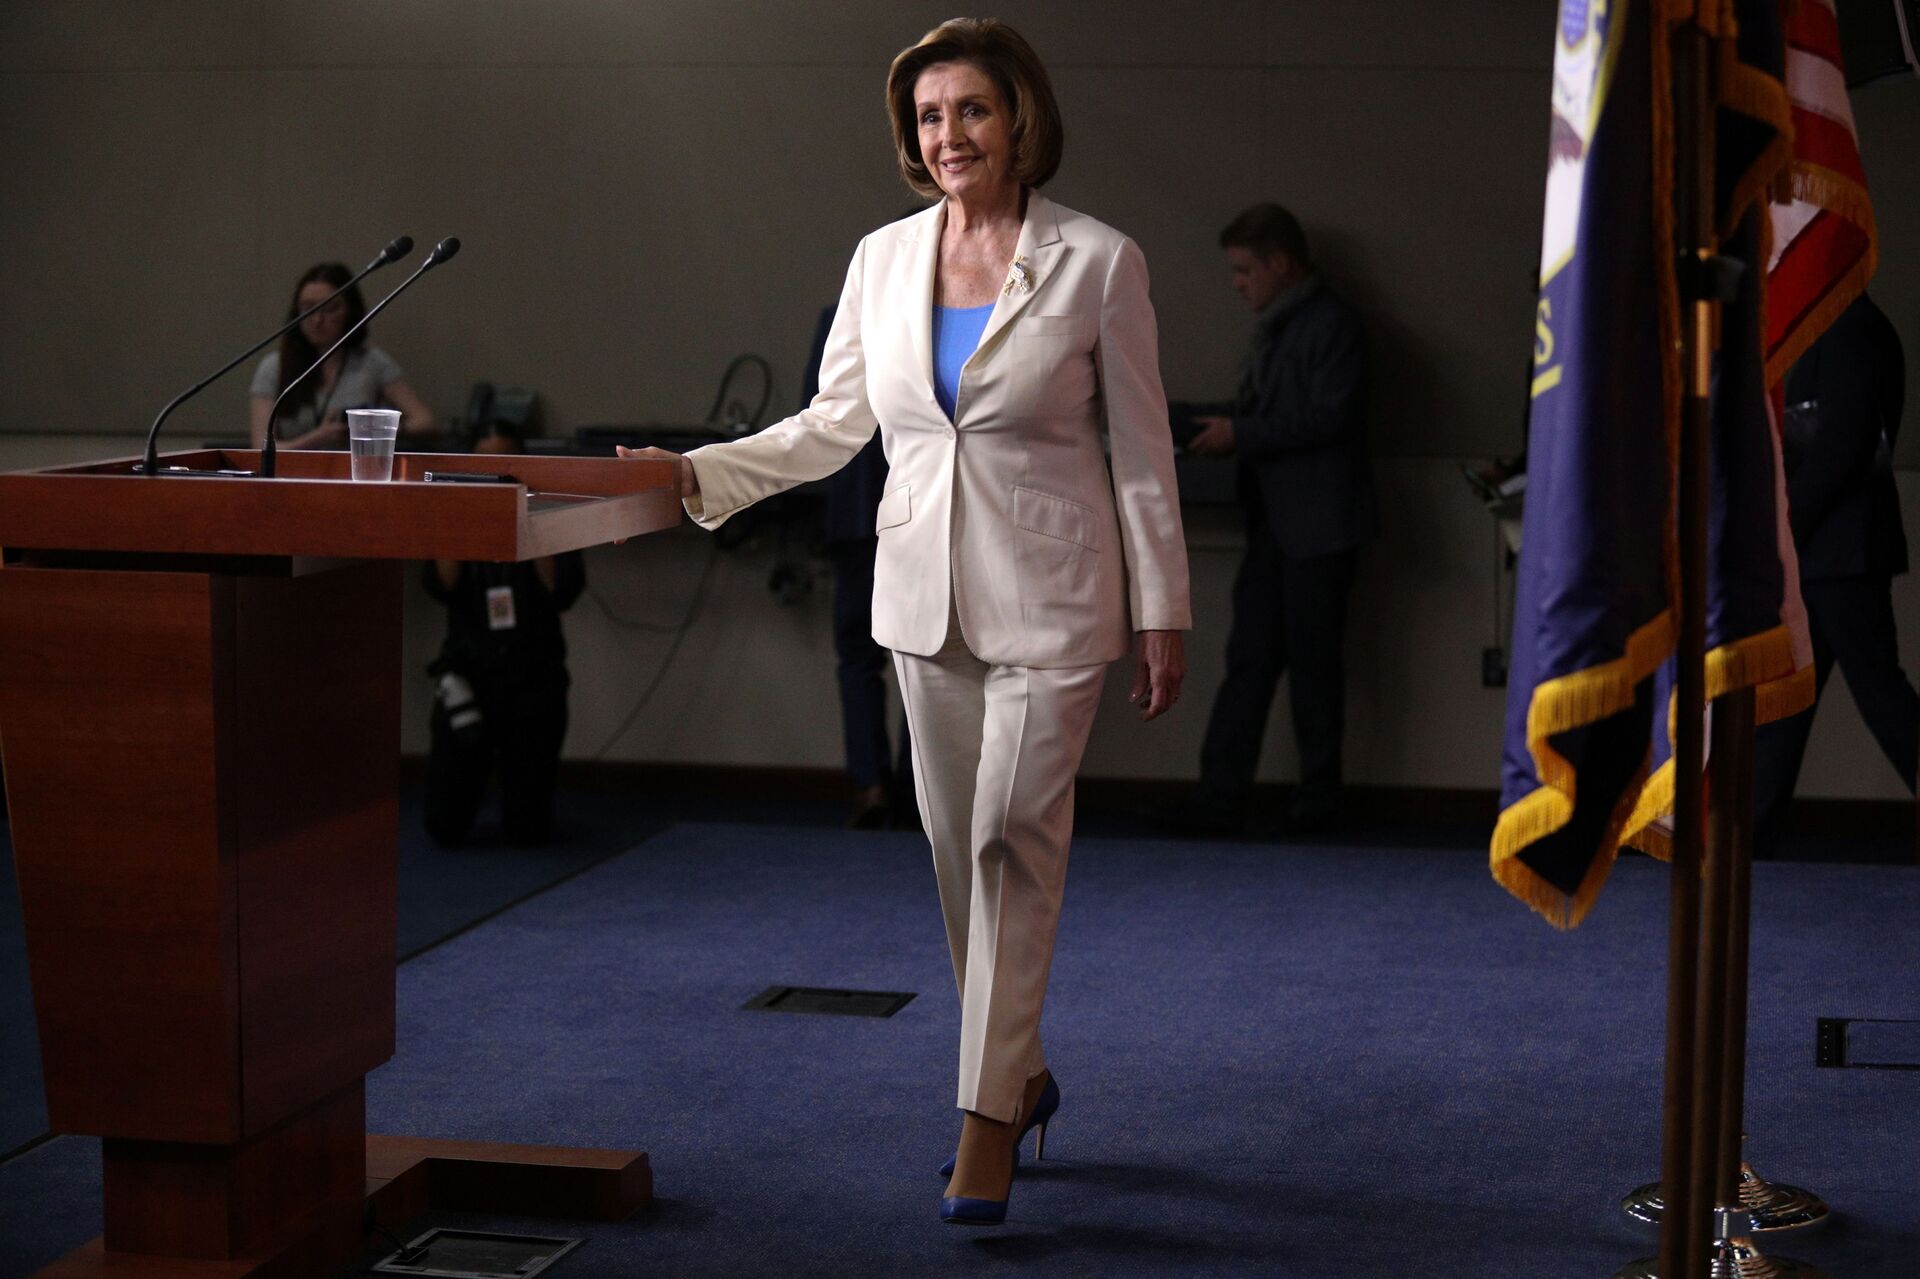 U.S. Speaker of the House Nancy Pelosi walks on stage before her remarks during a weekly news conference on Capitol Hill in Washington, U.S., June 24, 2021 - Sputnik International, 1920, 07.09.2021